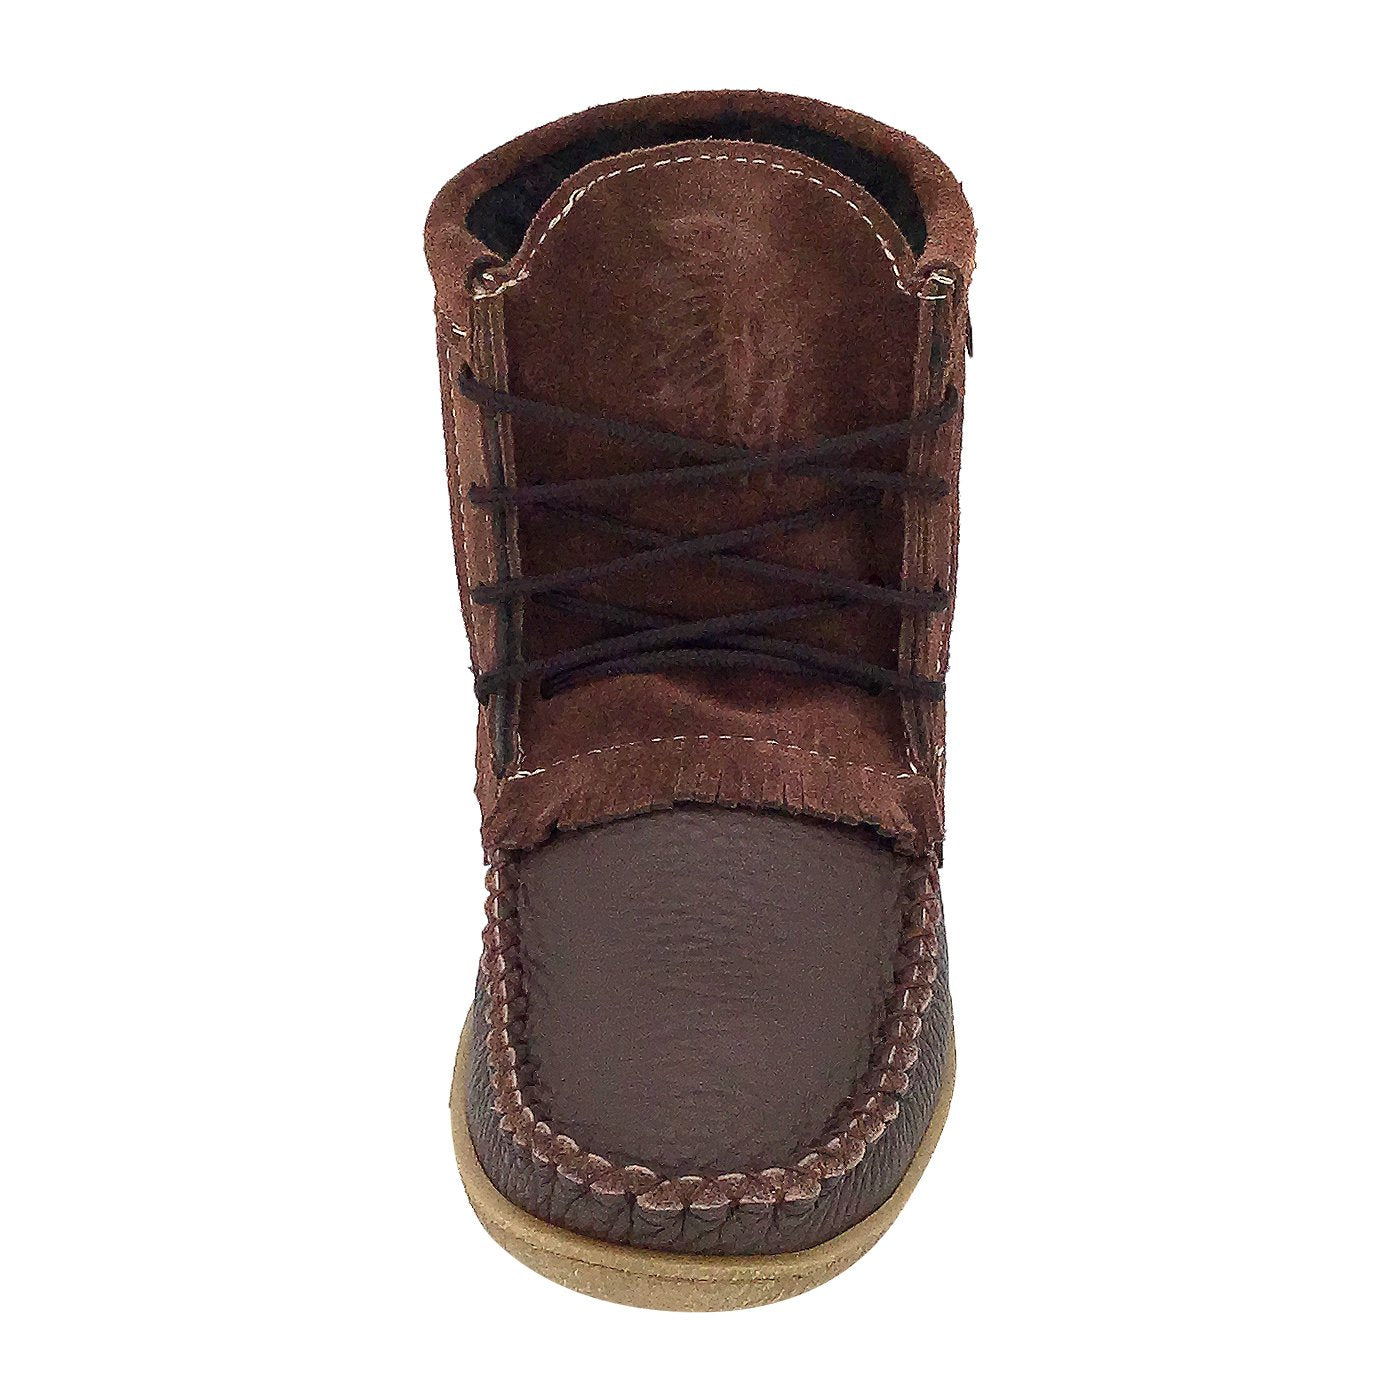 Men's Mohican Suede Moccasin Boots